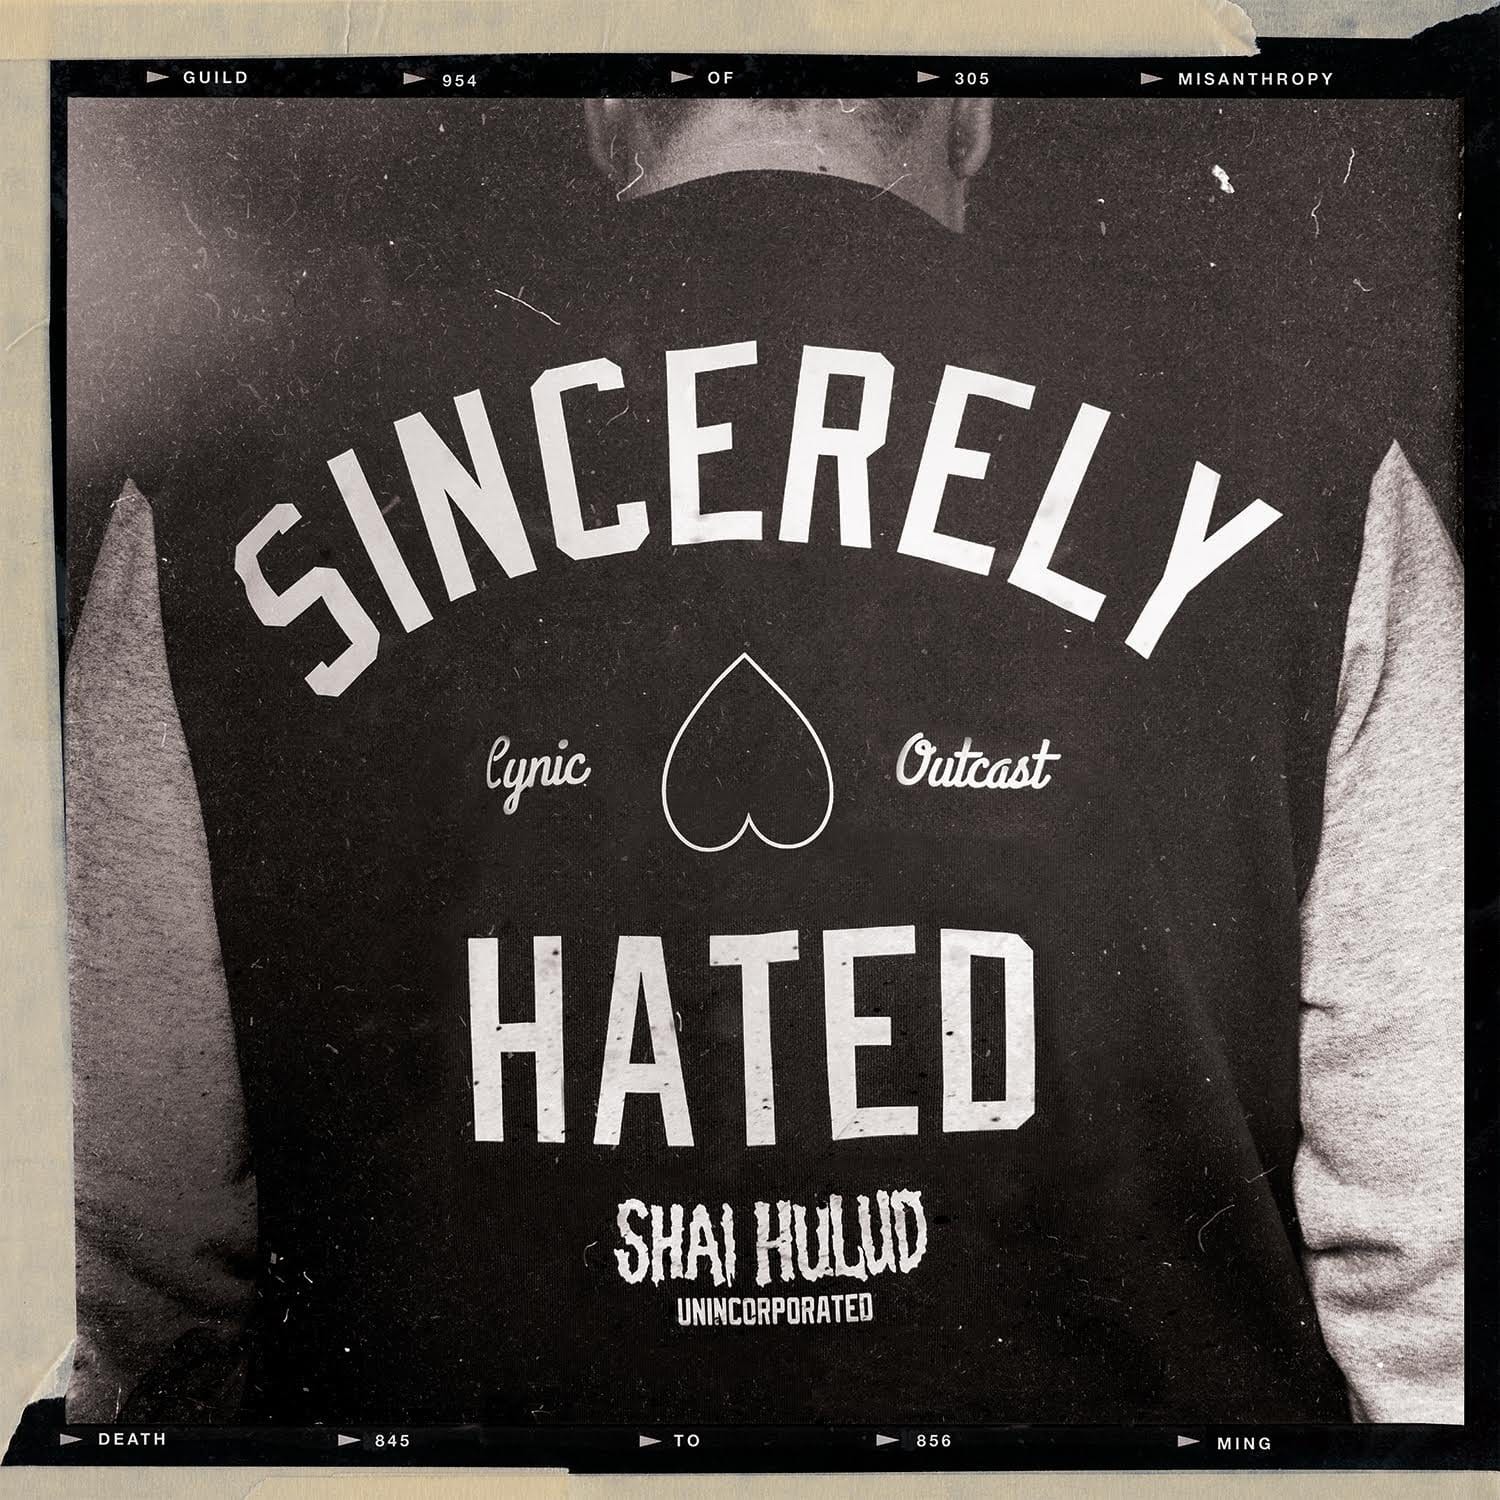 Just Can't Hate Enough - NO SLEEP RECORDS - Shai Hulud